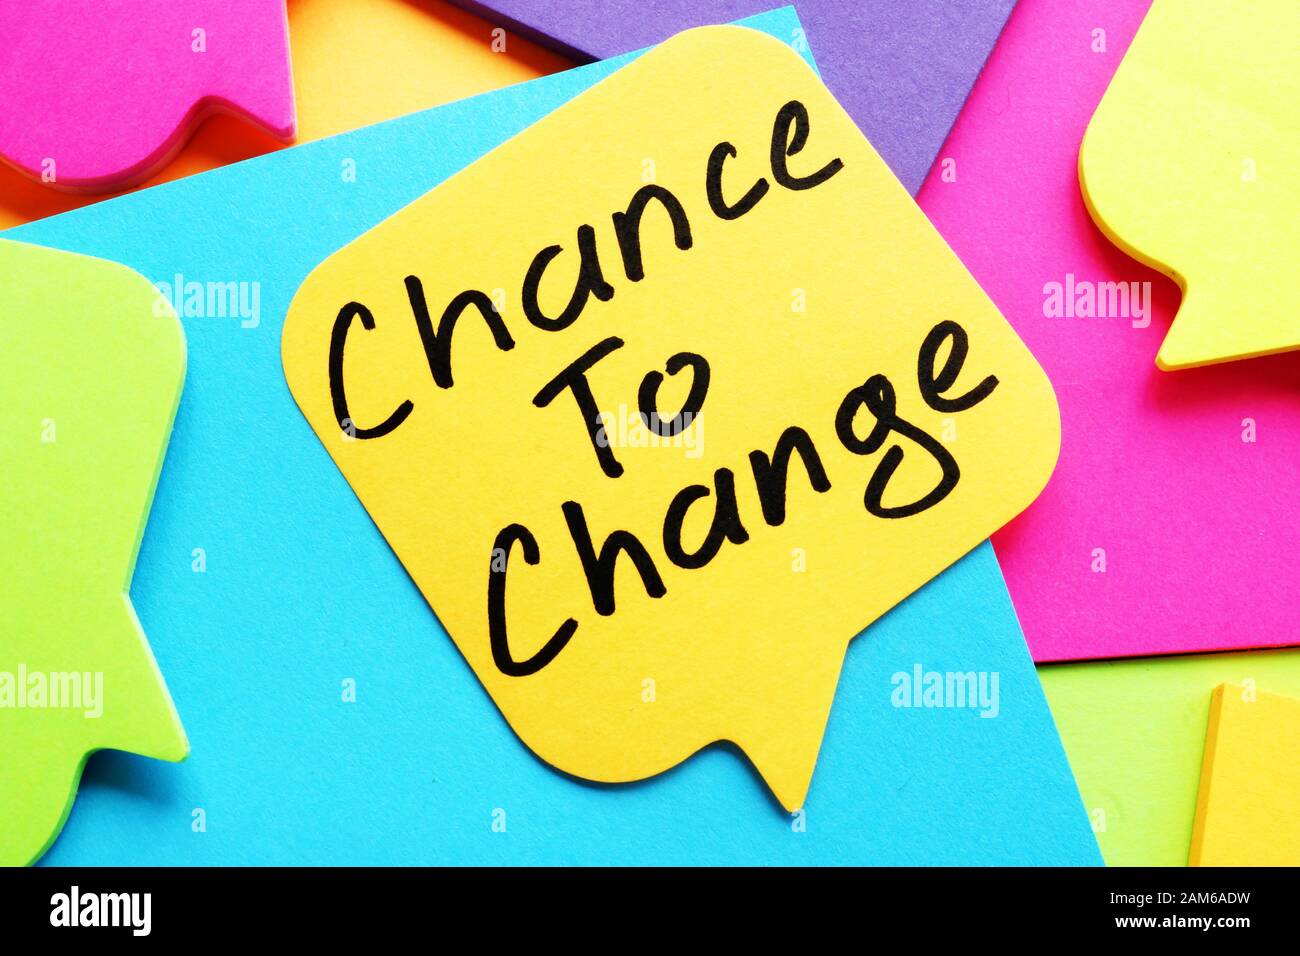 Chance to change handwritten on the color sheet. Motivation concept. Stock Photo